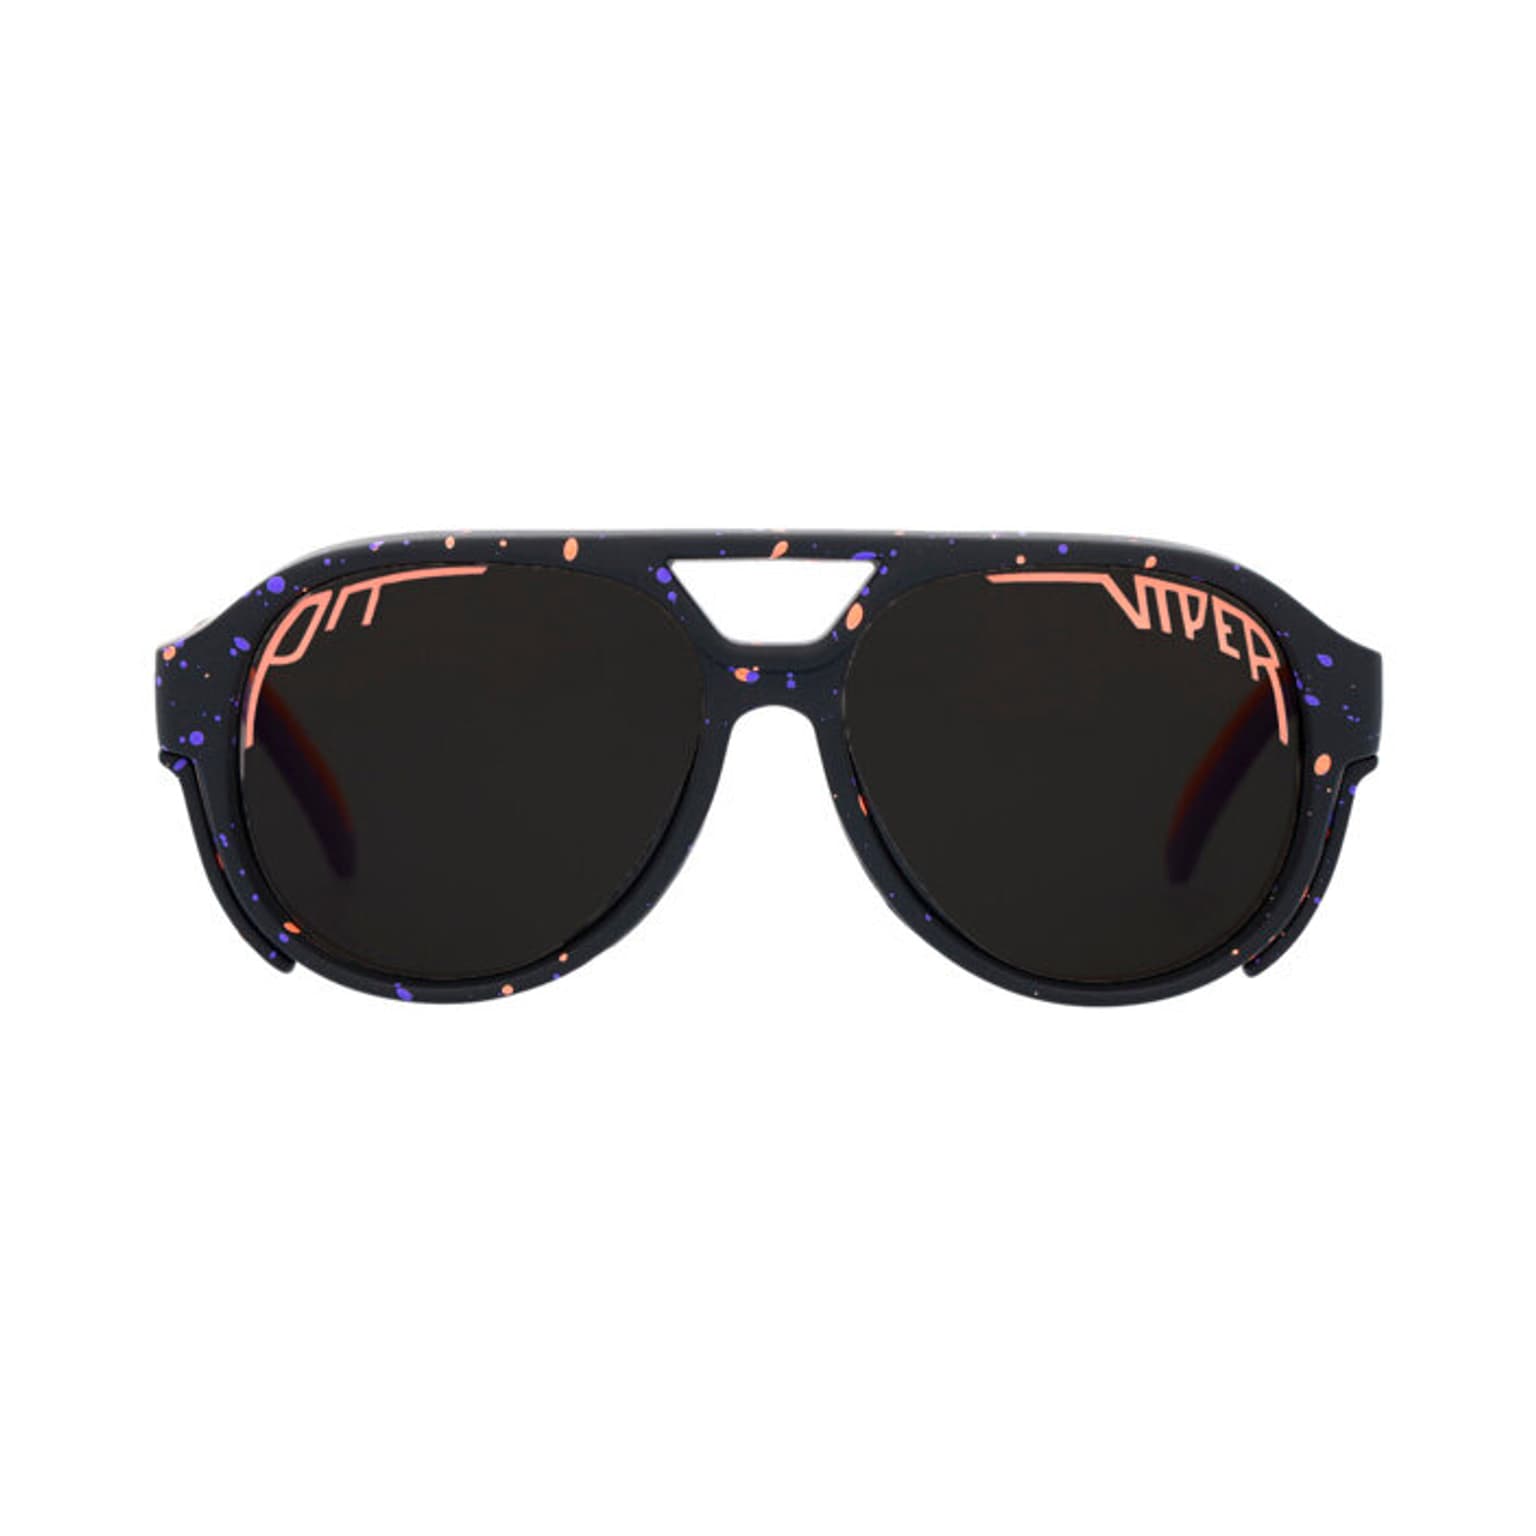 Pit Viper Pit Viper The Exciters The Naples Polarized Sportbrille 2